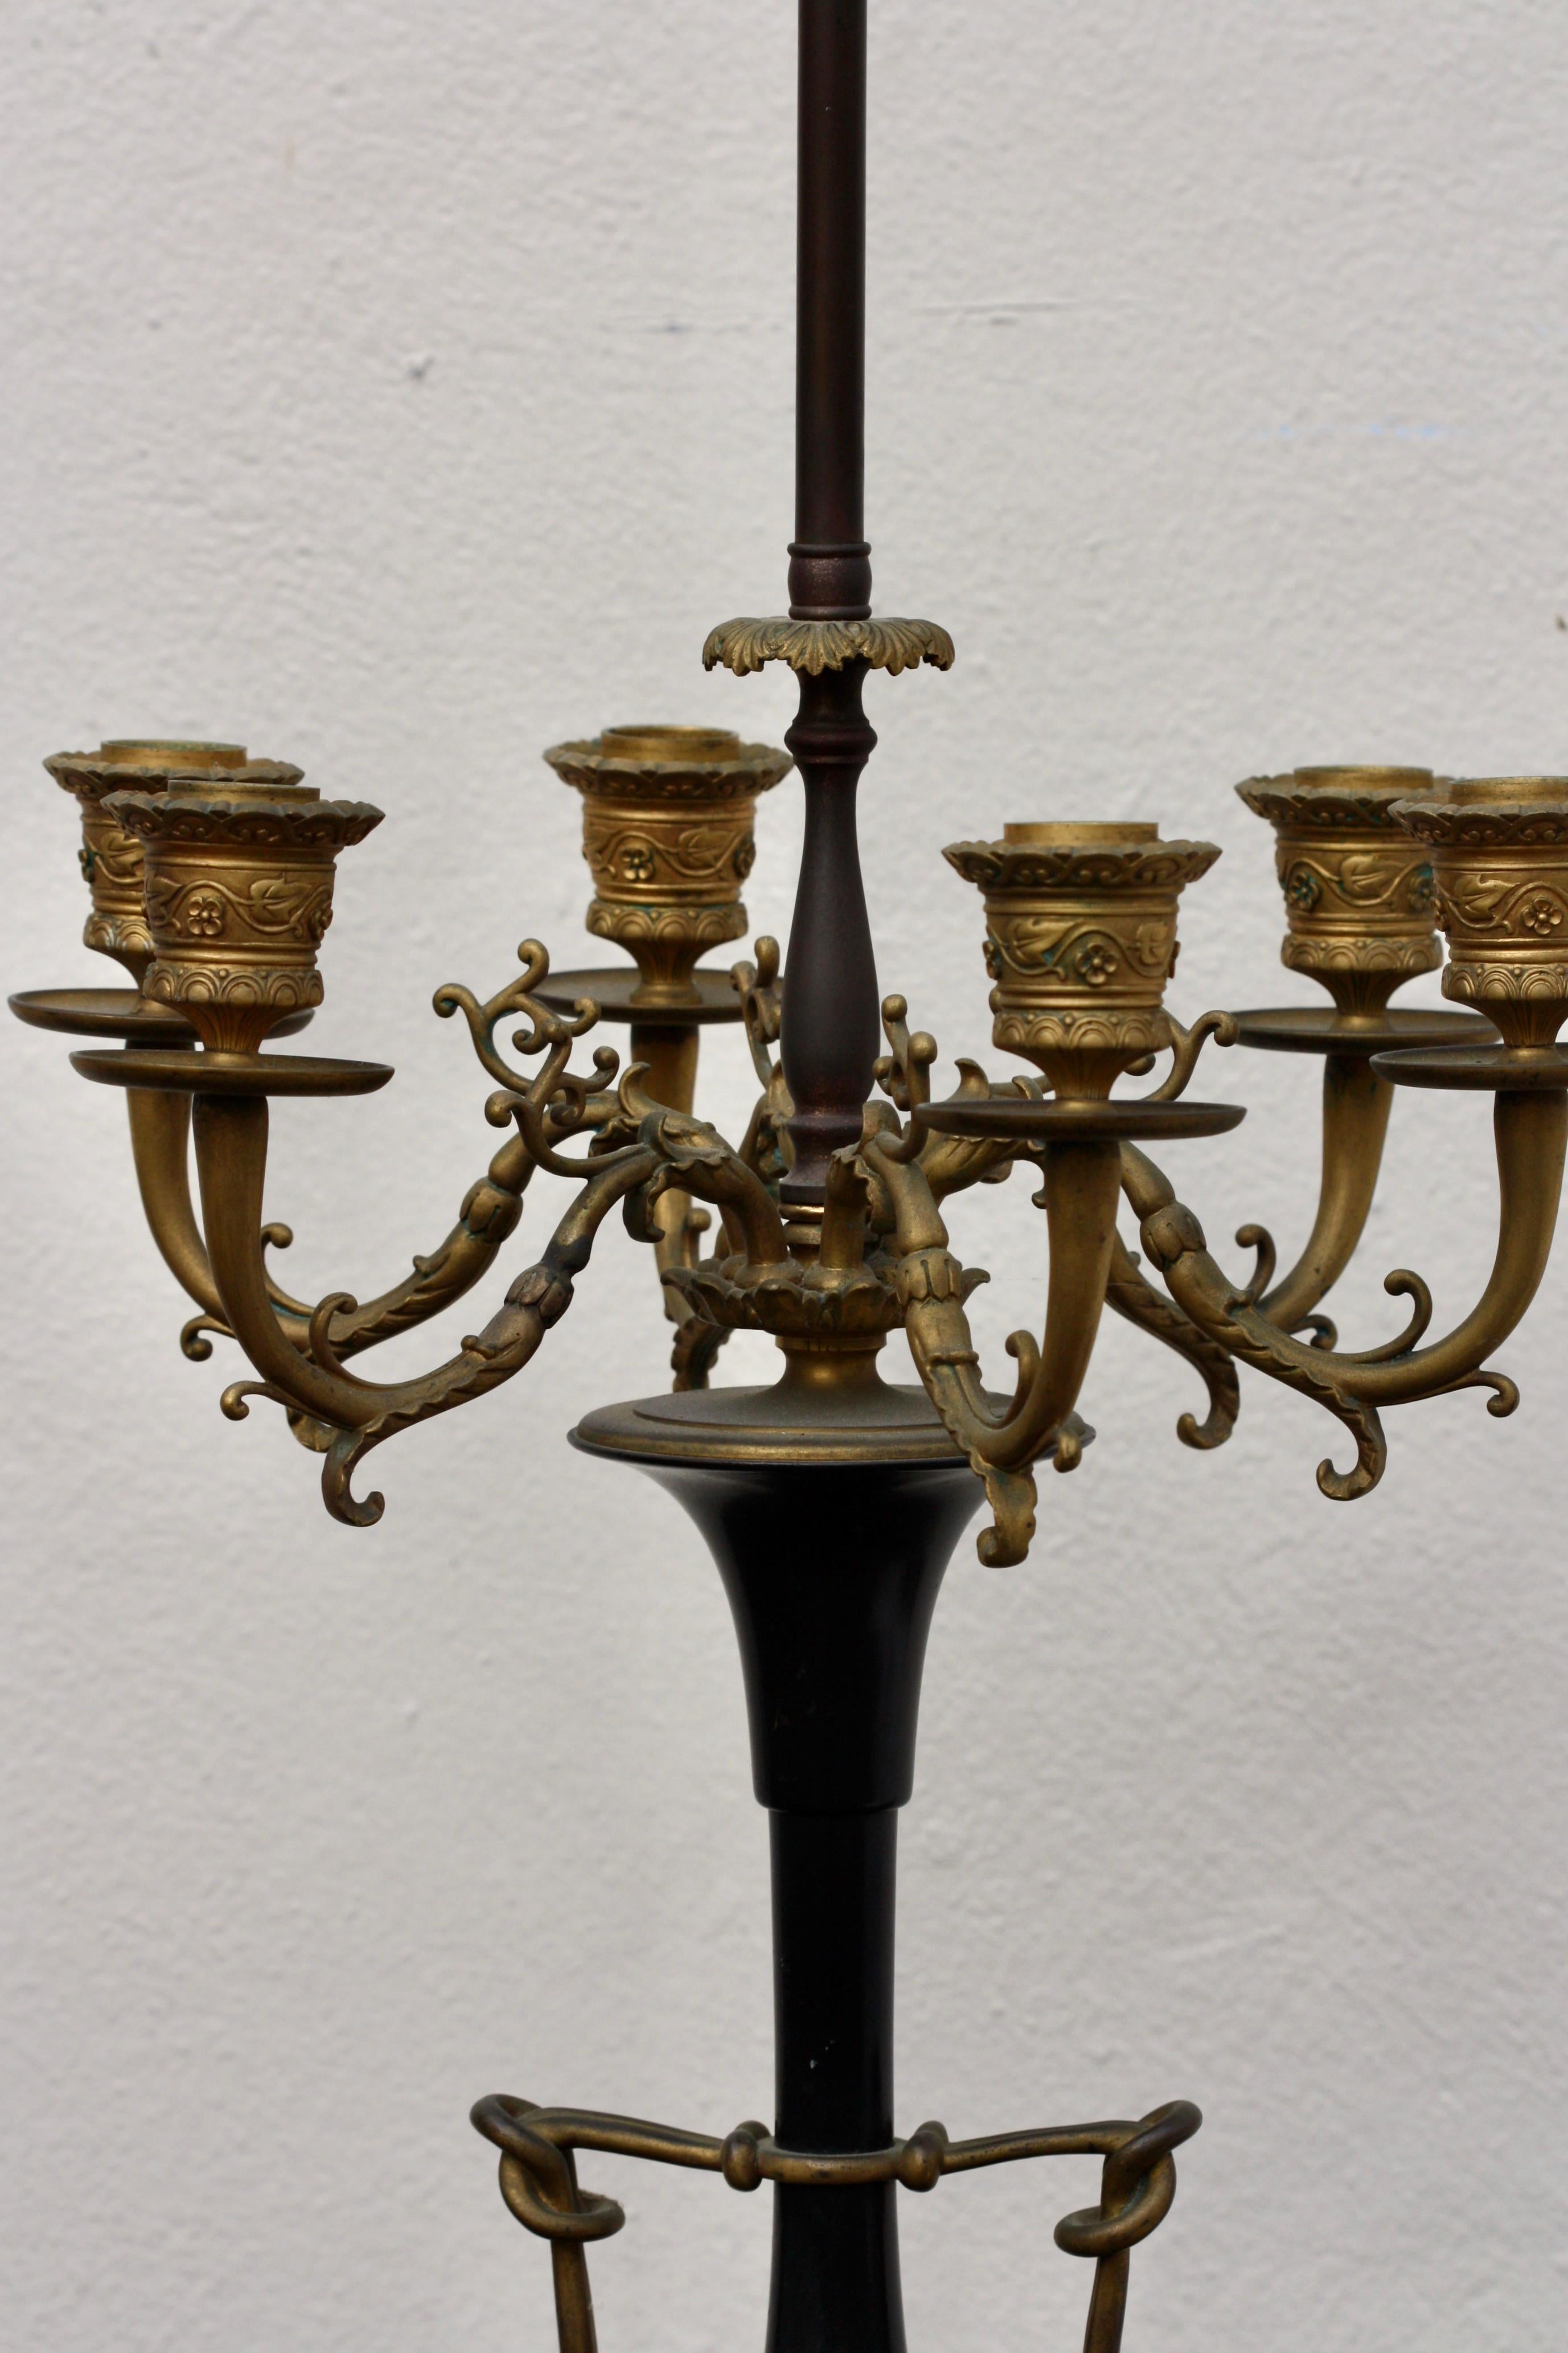 Ferdinand Barbedienne
1810-1892
A Neo-Grec gilt and patinated bronze six-light candelabra now fitted for electricity, France, last quarter of the 19th century, after a design by Ferdinand Barbedienne, amphora inscribed F. BARBEDIENNE raised on a